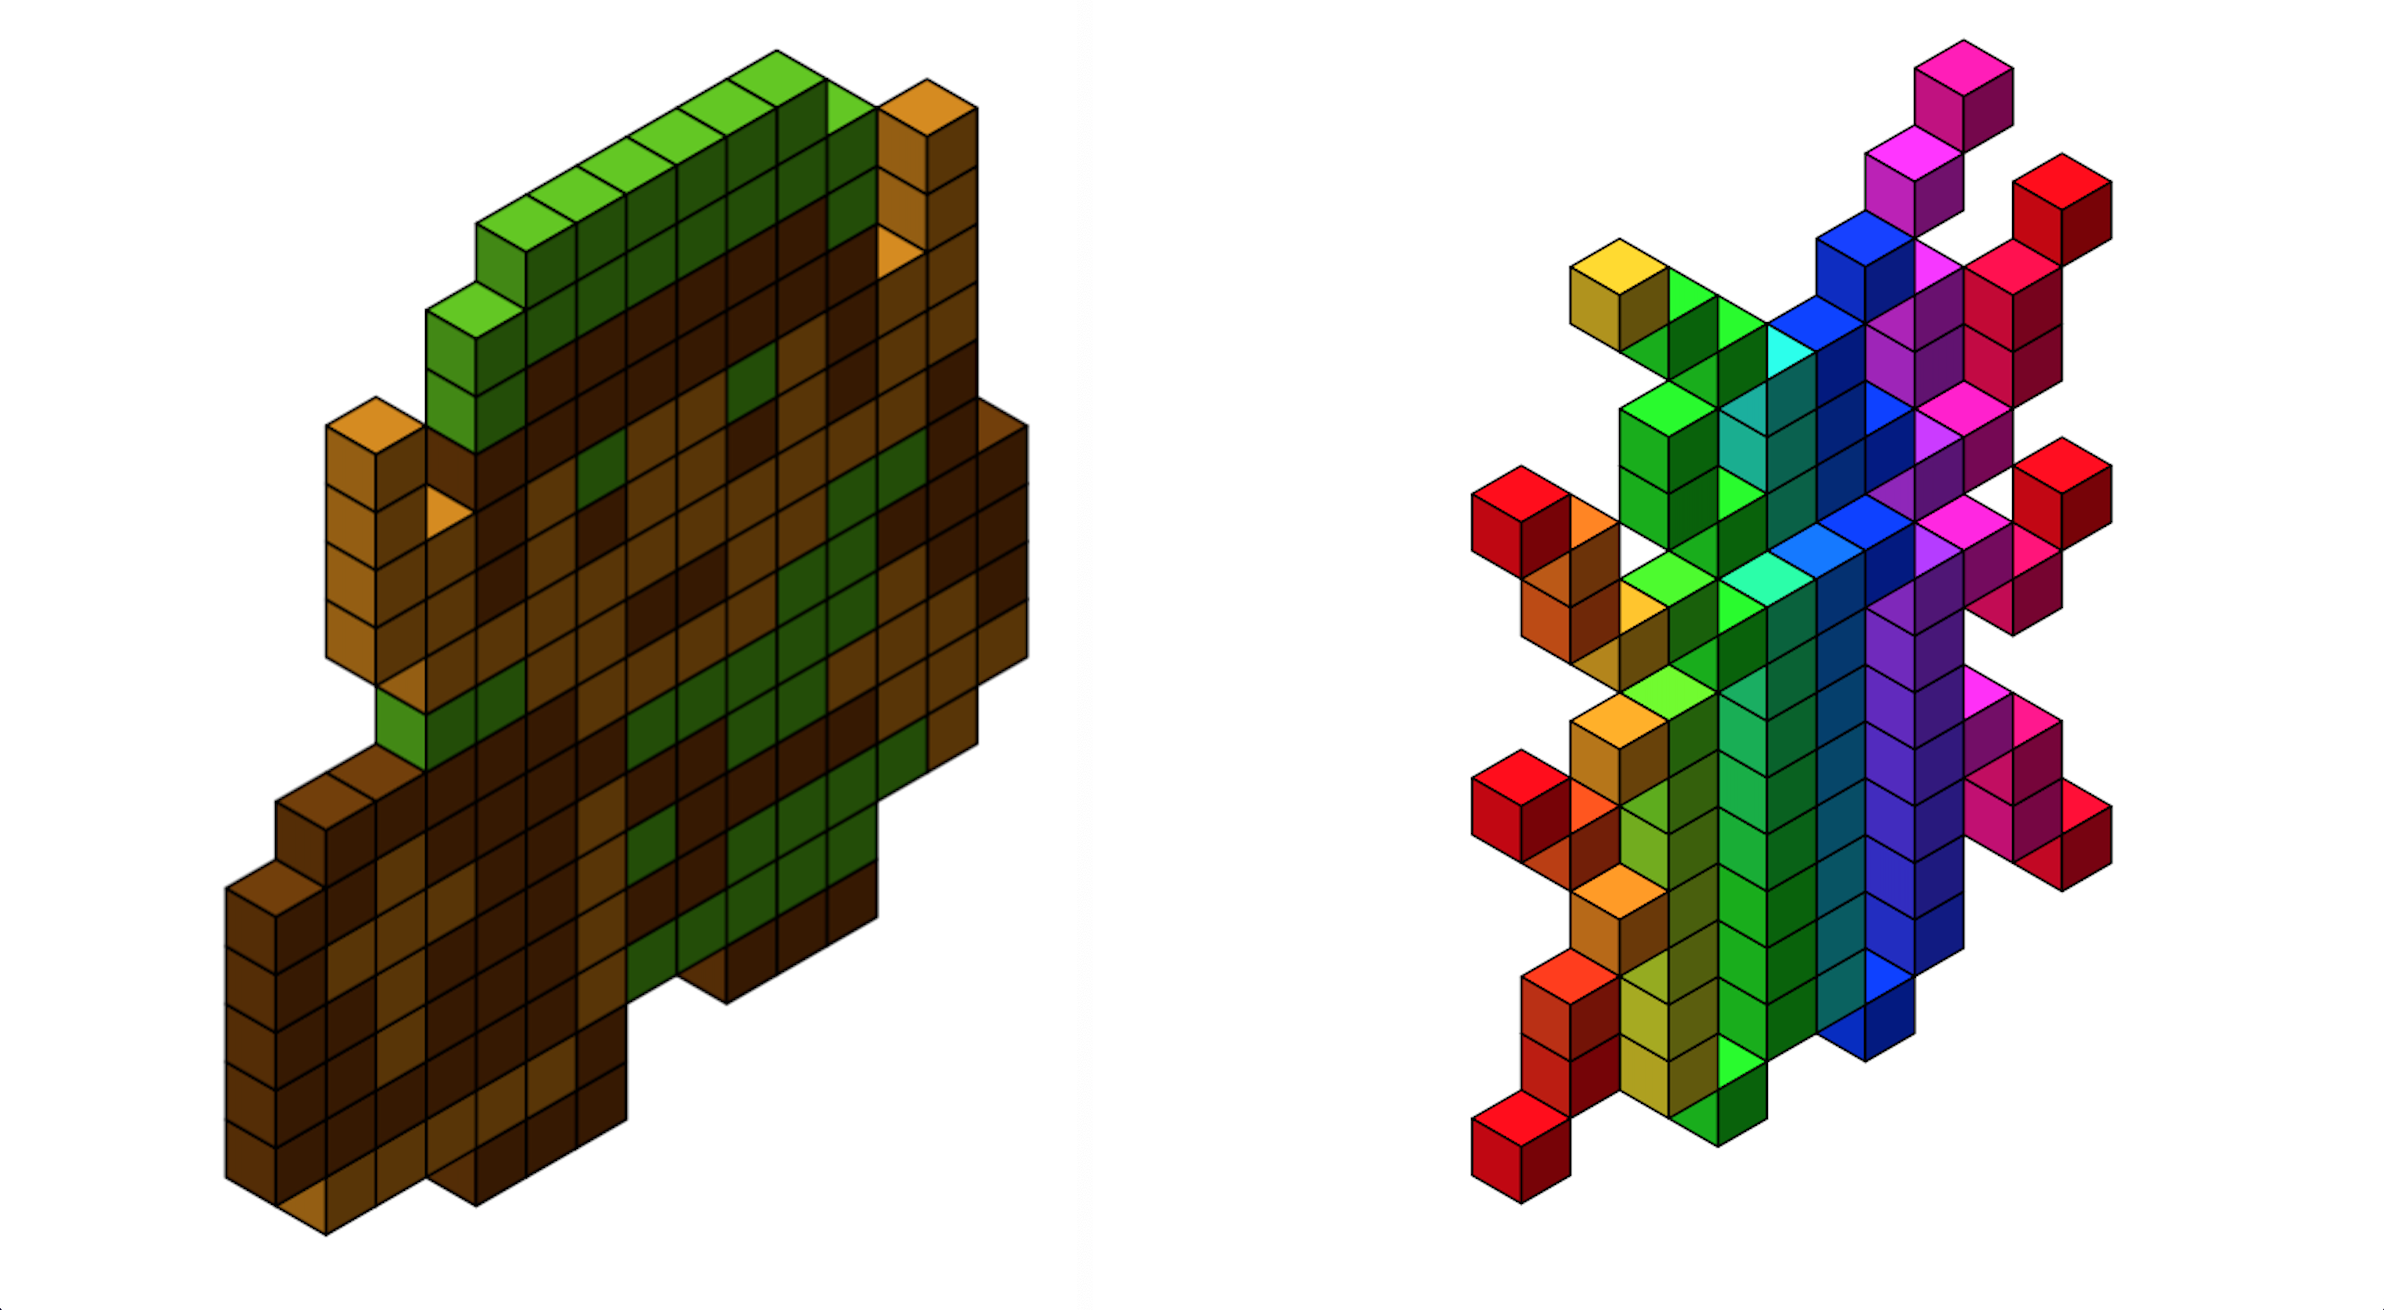 Two images side-by-side. A sprite of Link from the Legend of Zelda on the NES, rendered with isometric cubes thanks to the 'isocubes' R package. A pixelated image of an insect—the logo of rostrum.blog—rendered with isometric cubes, thanks to the 'isocube' package. The cubes are rainbow-coloured from left to right.